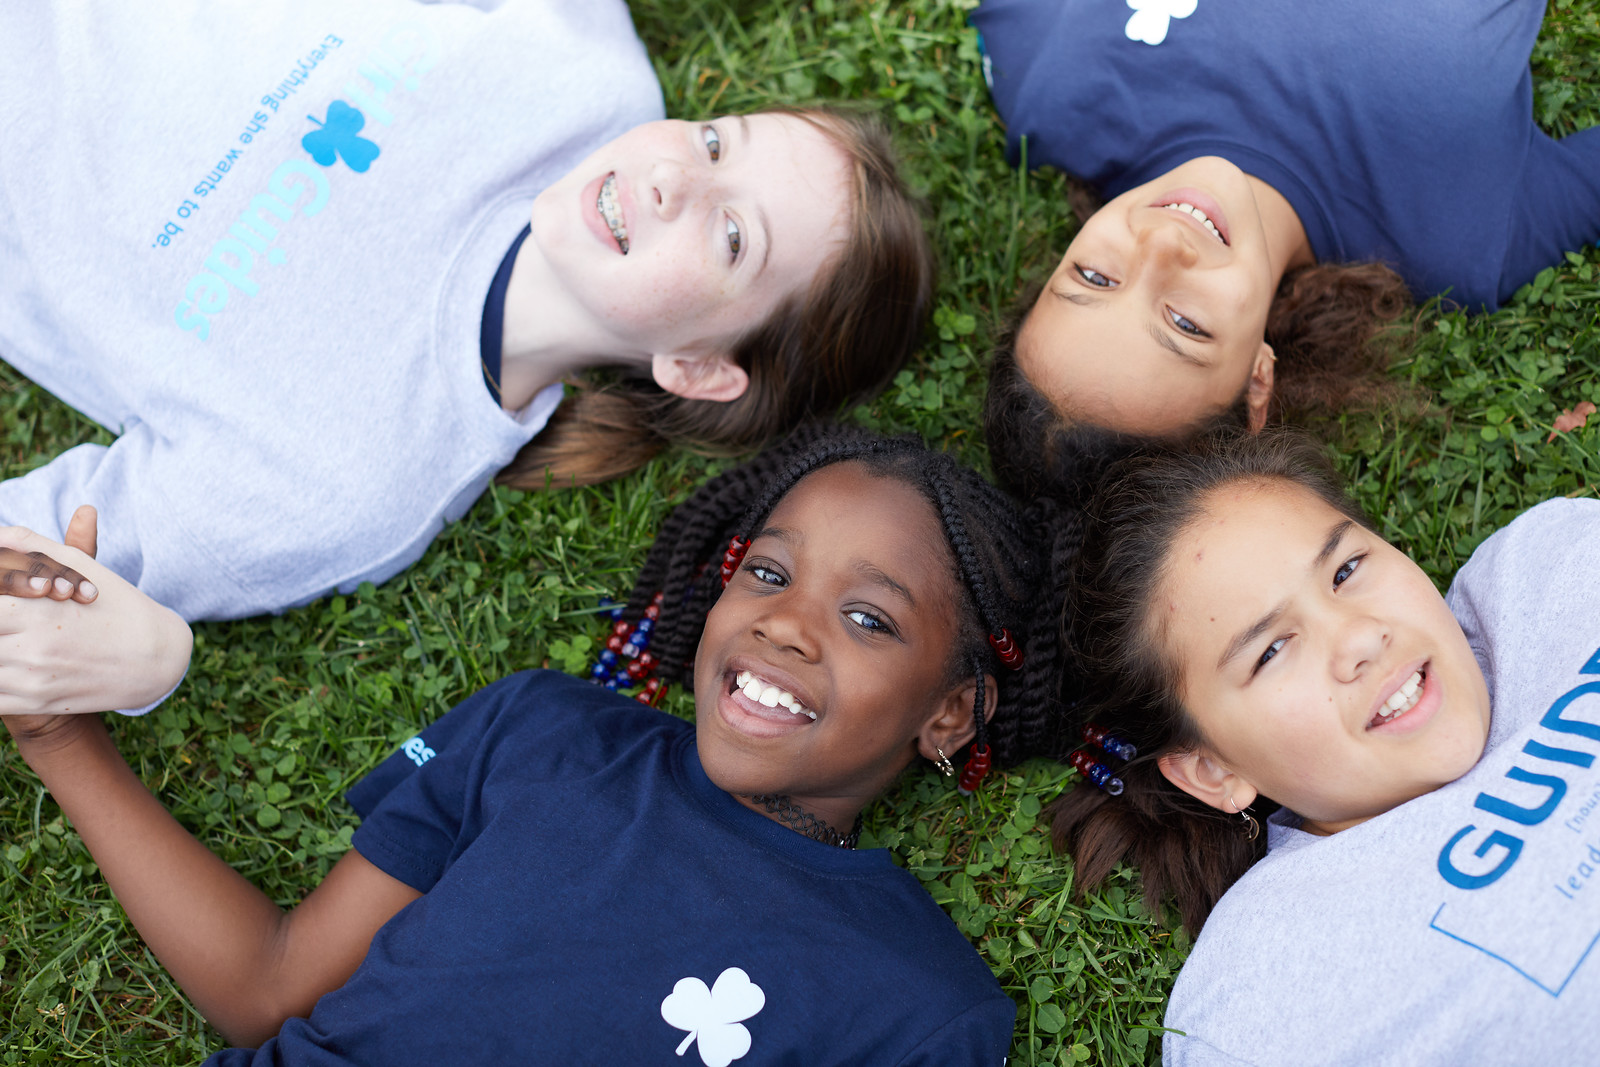 Four Girl Guides aged 9 to 11 lying in a circle in the grass outside, holding hands and smiling